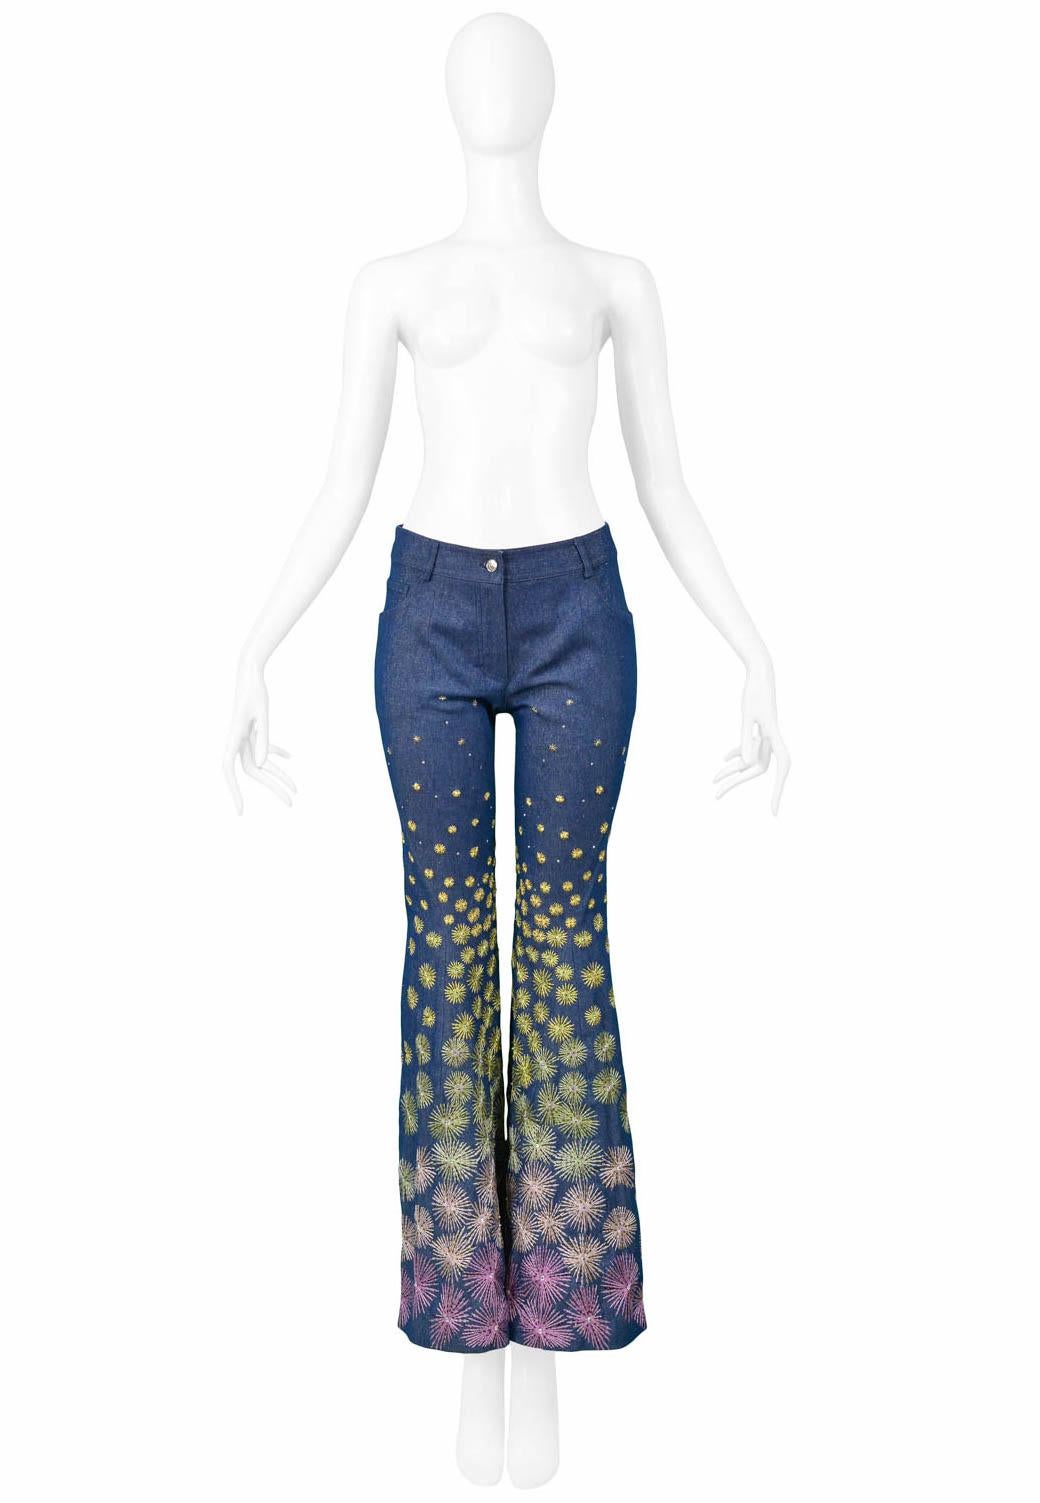 Vintage Christian Dior by John Galliano dark blue denim jeans featuring flared bottoms, multicolor heavily embroidered firework detail, and front pockets. From the 2002 Collection. 

Excellent Vintage Condition.

Size 40